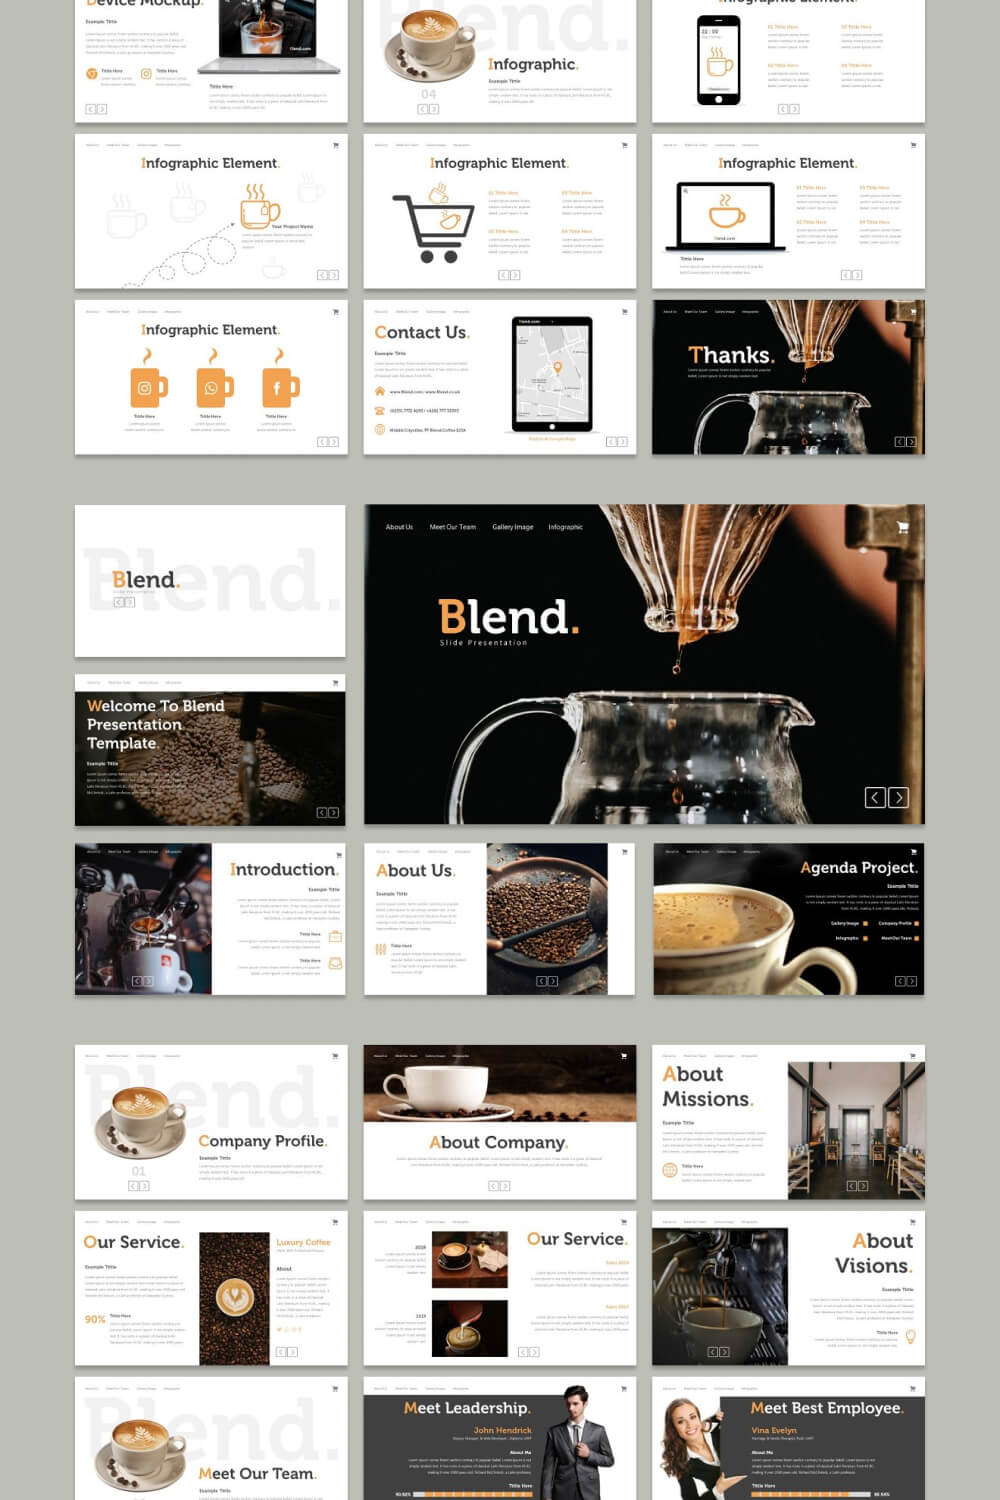 Introduction of Blend.